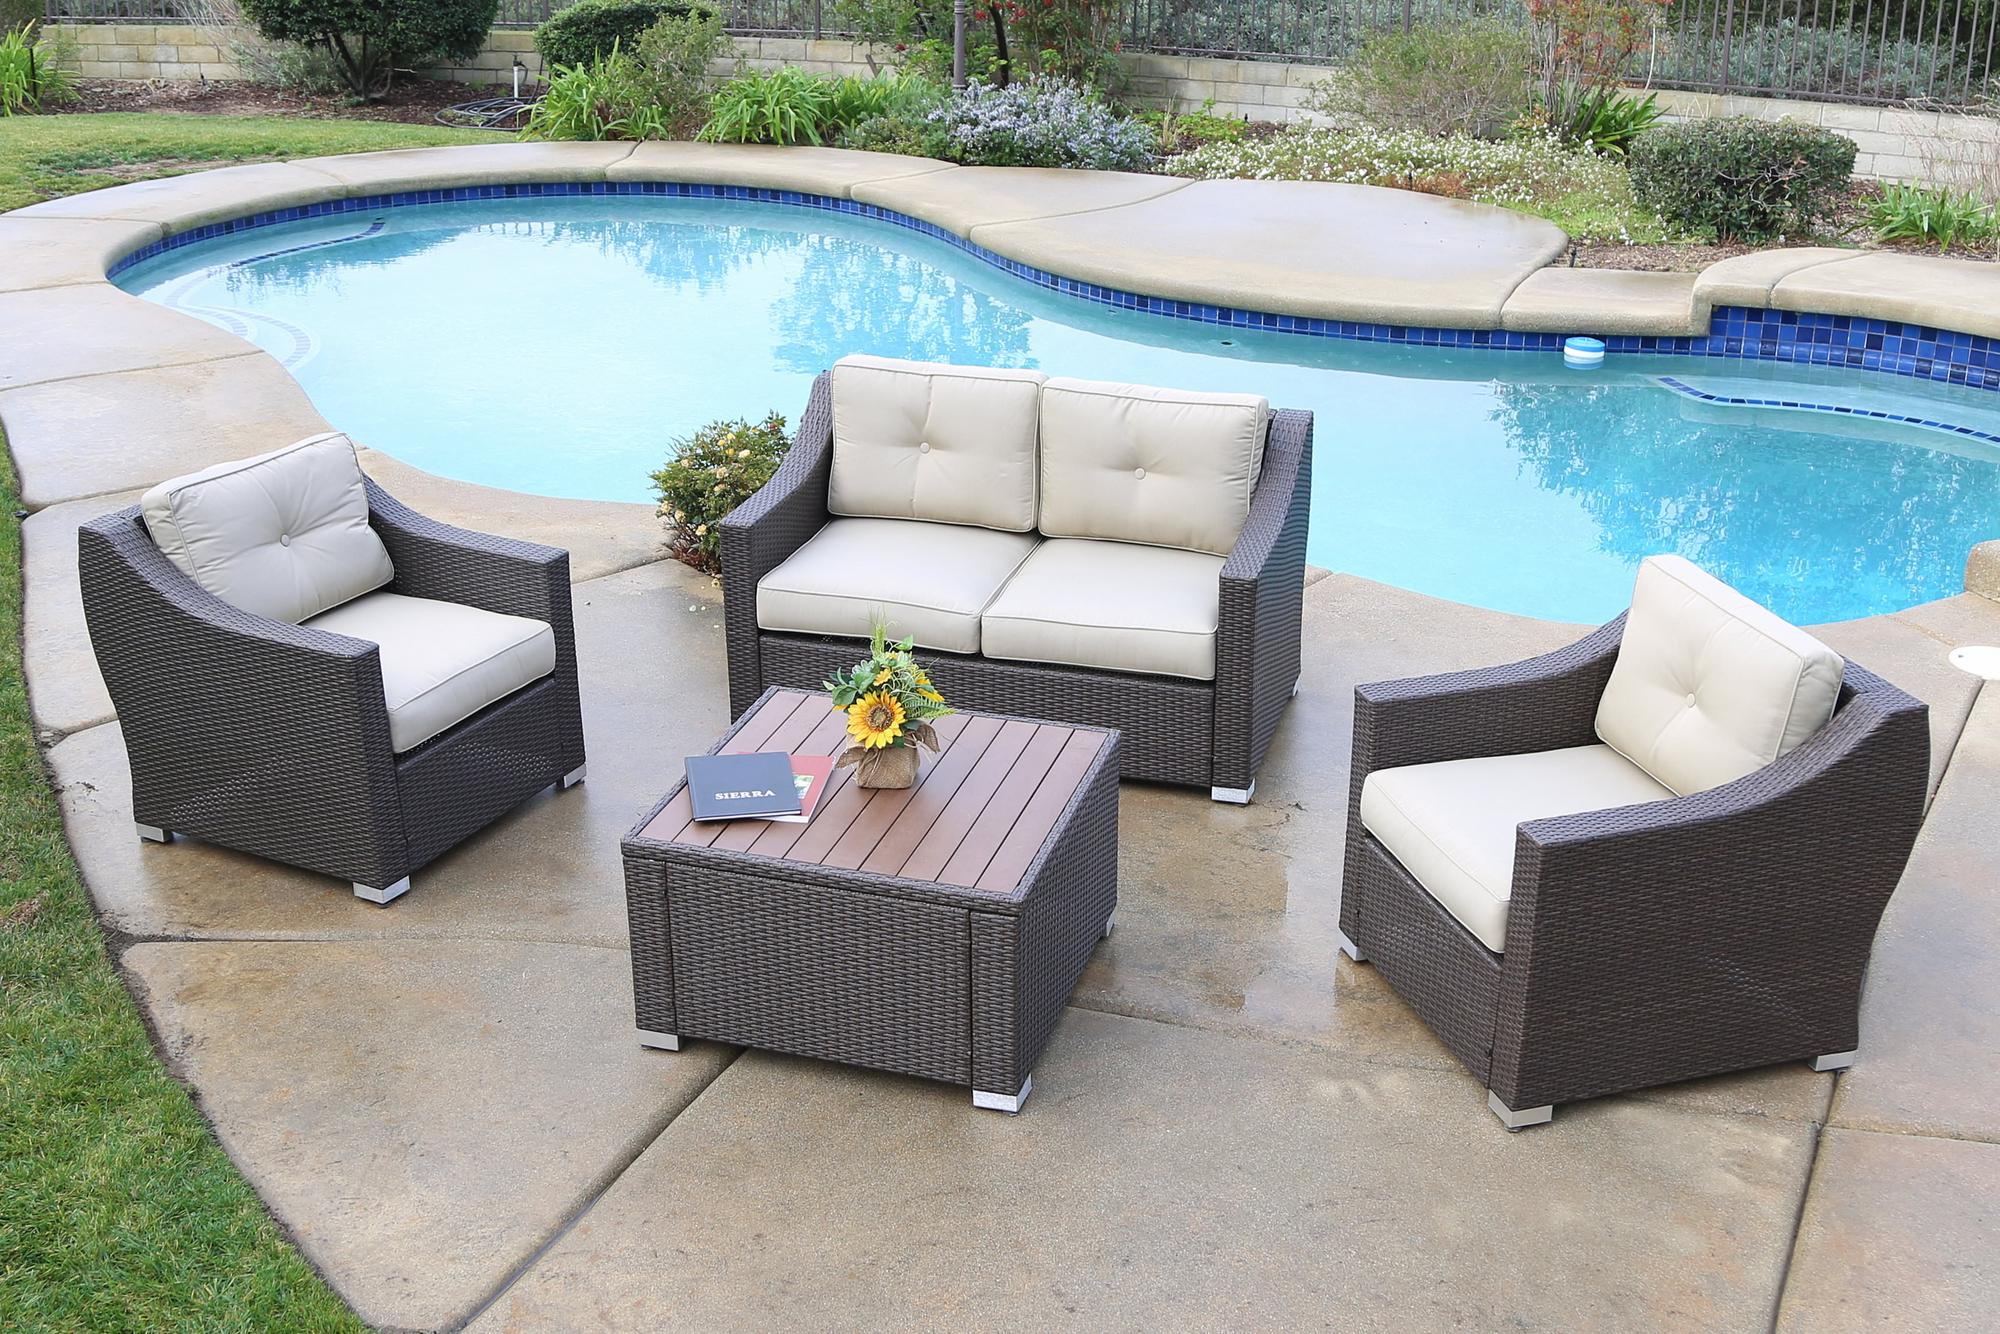 Sb-3775ds-7 4 Piece South Beach Wicker Patio Deep Seating Group With Cushion